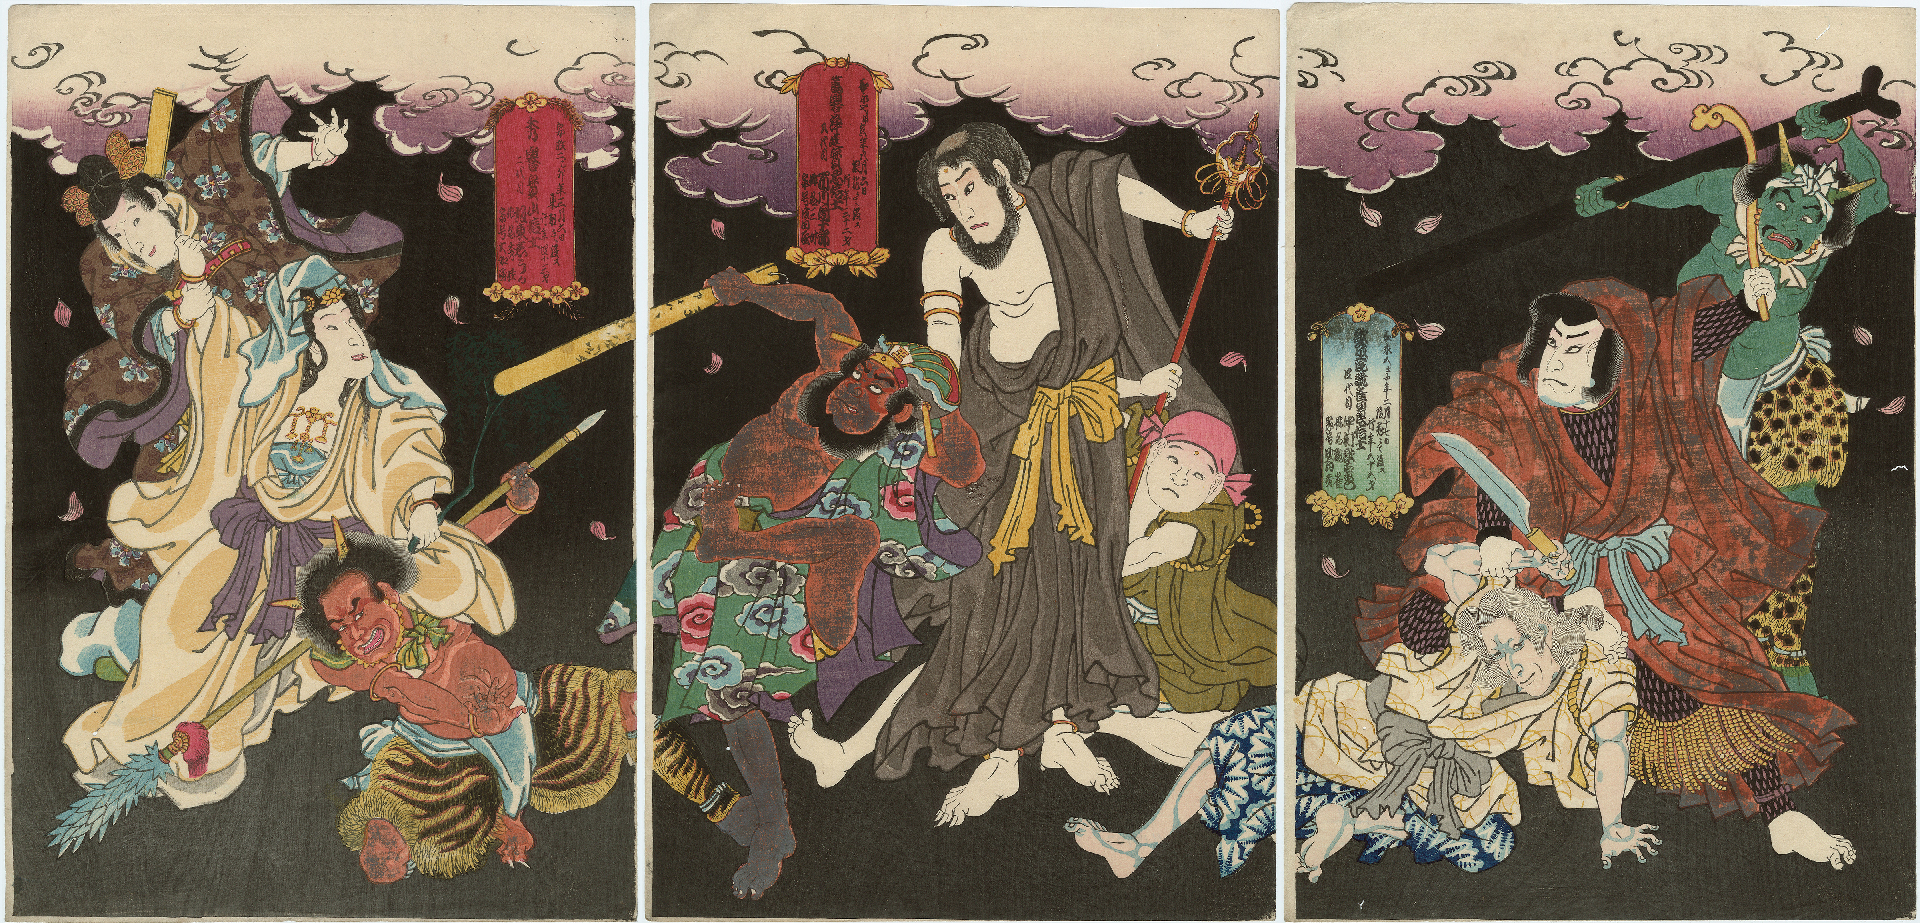 Triptych of dynamic scene of various people in robes struggling against each other